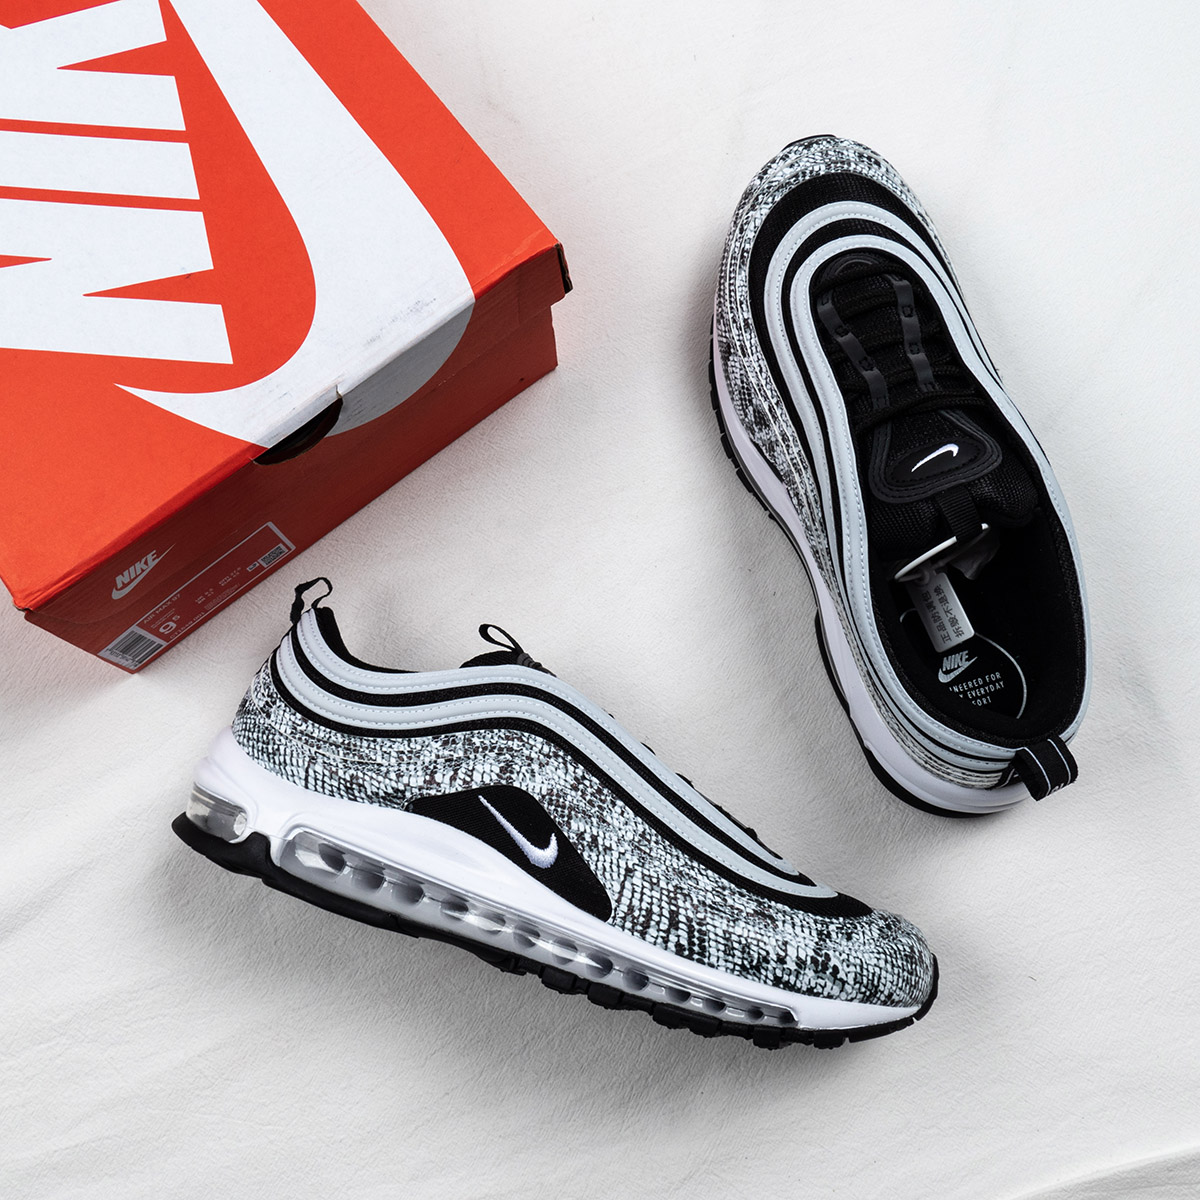 Nike Air Max 97 "Cocoa Snake" CT1549-001 Shoes